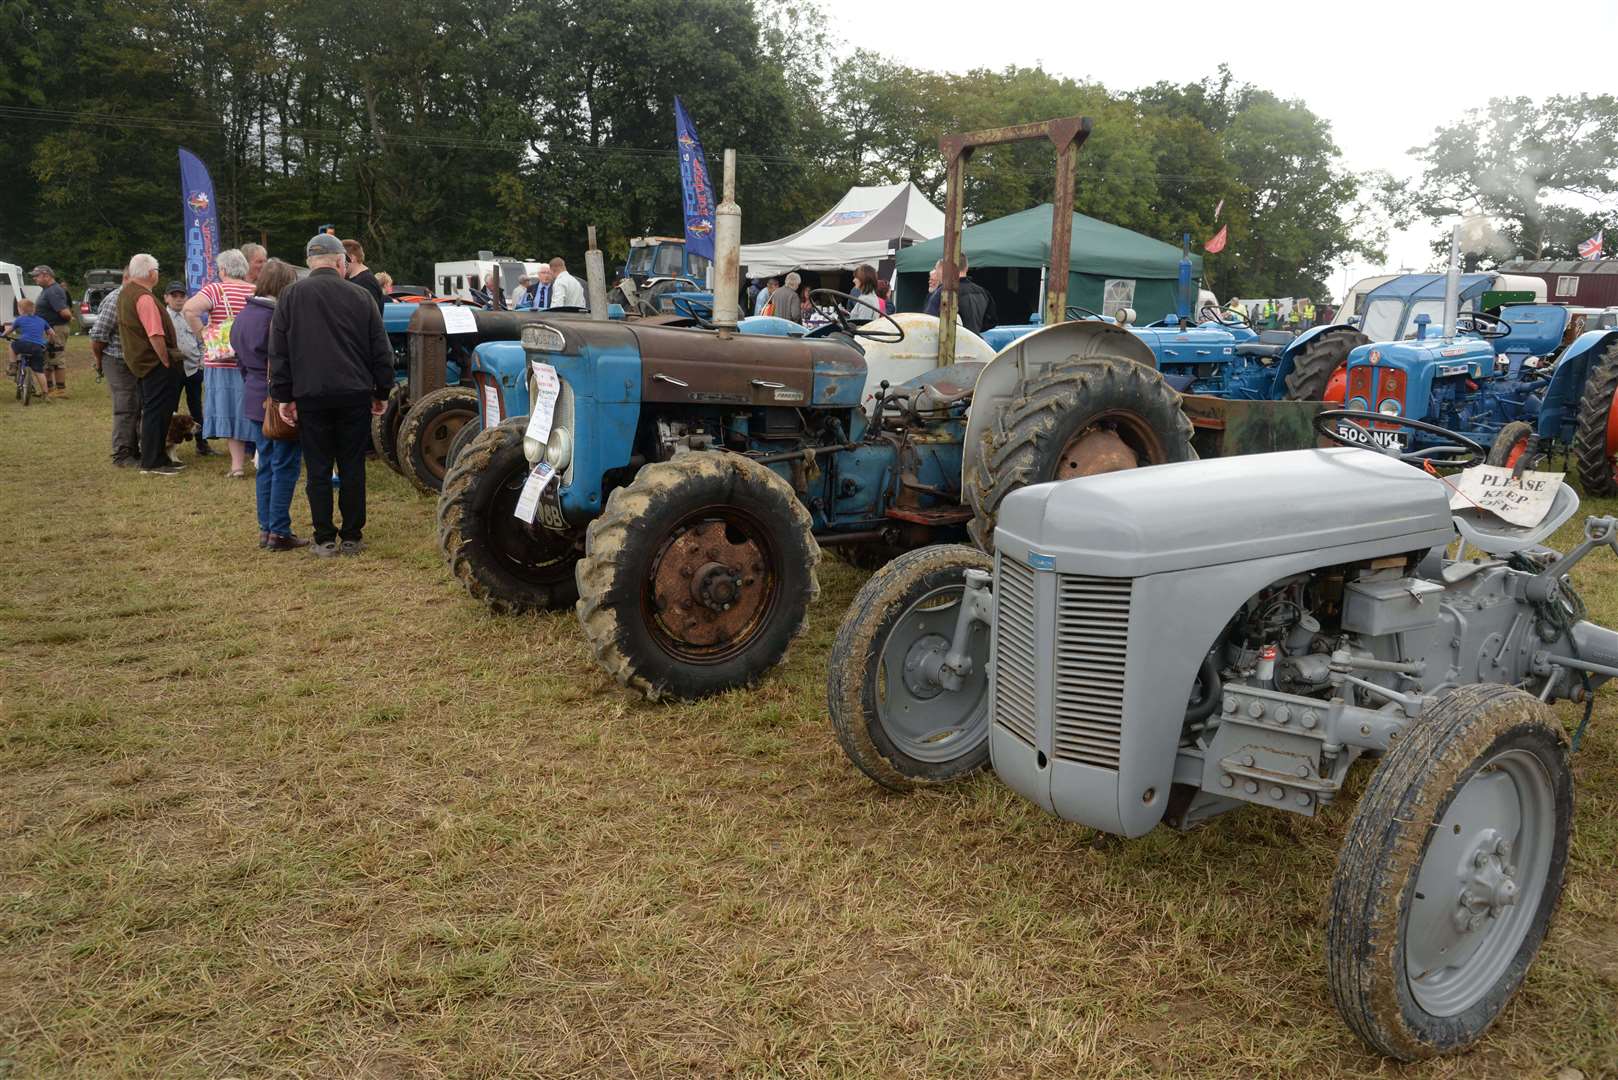 Vintage and classic tractors at last year's Biddenden Tractorfest